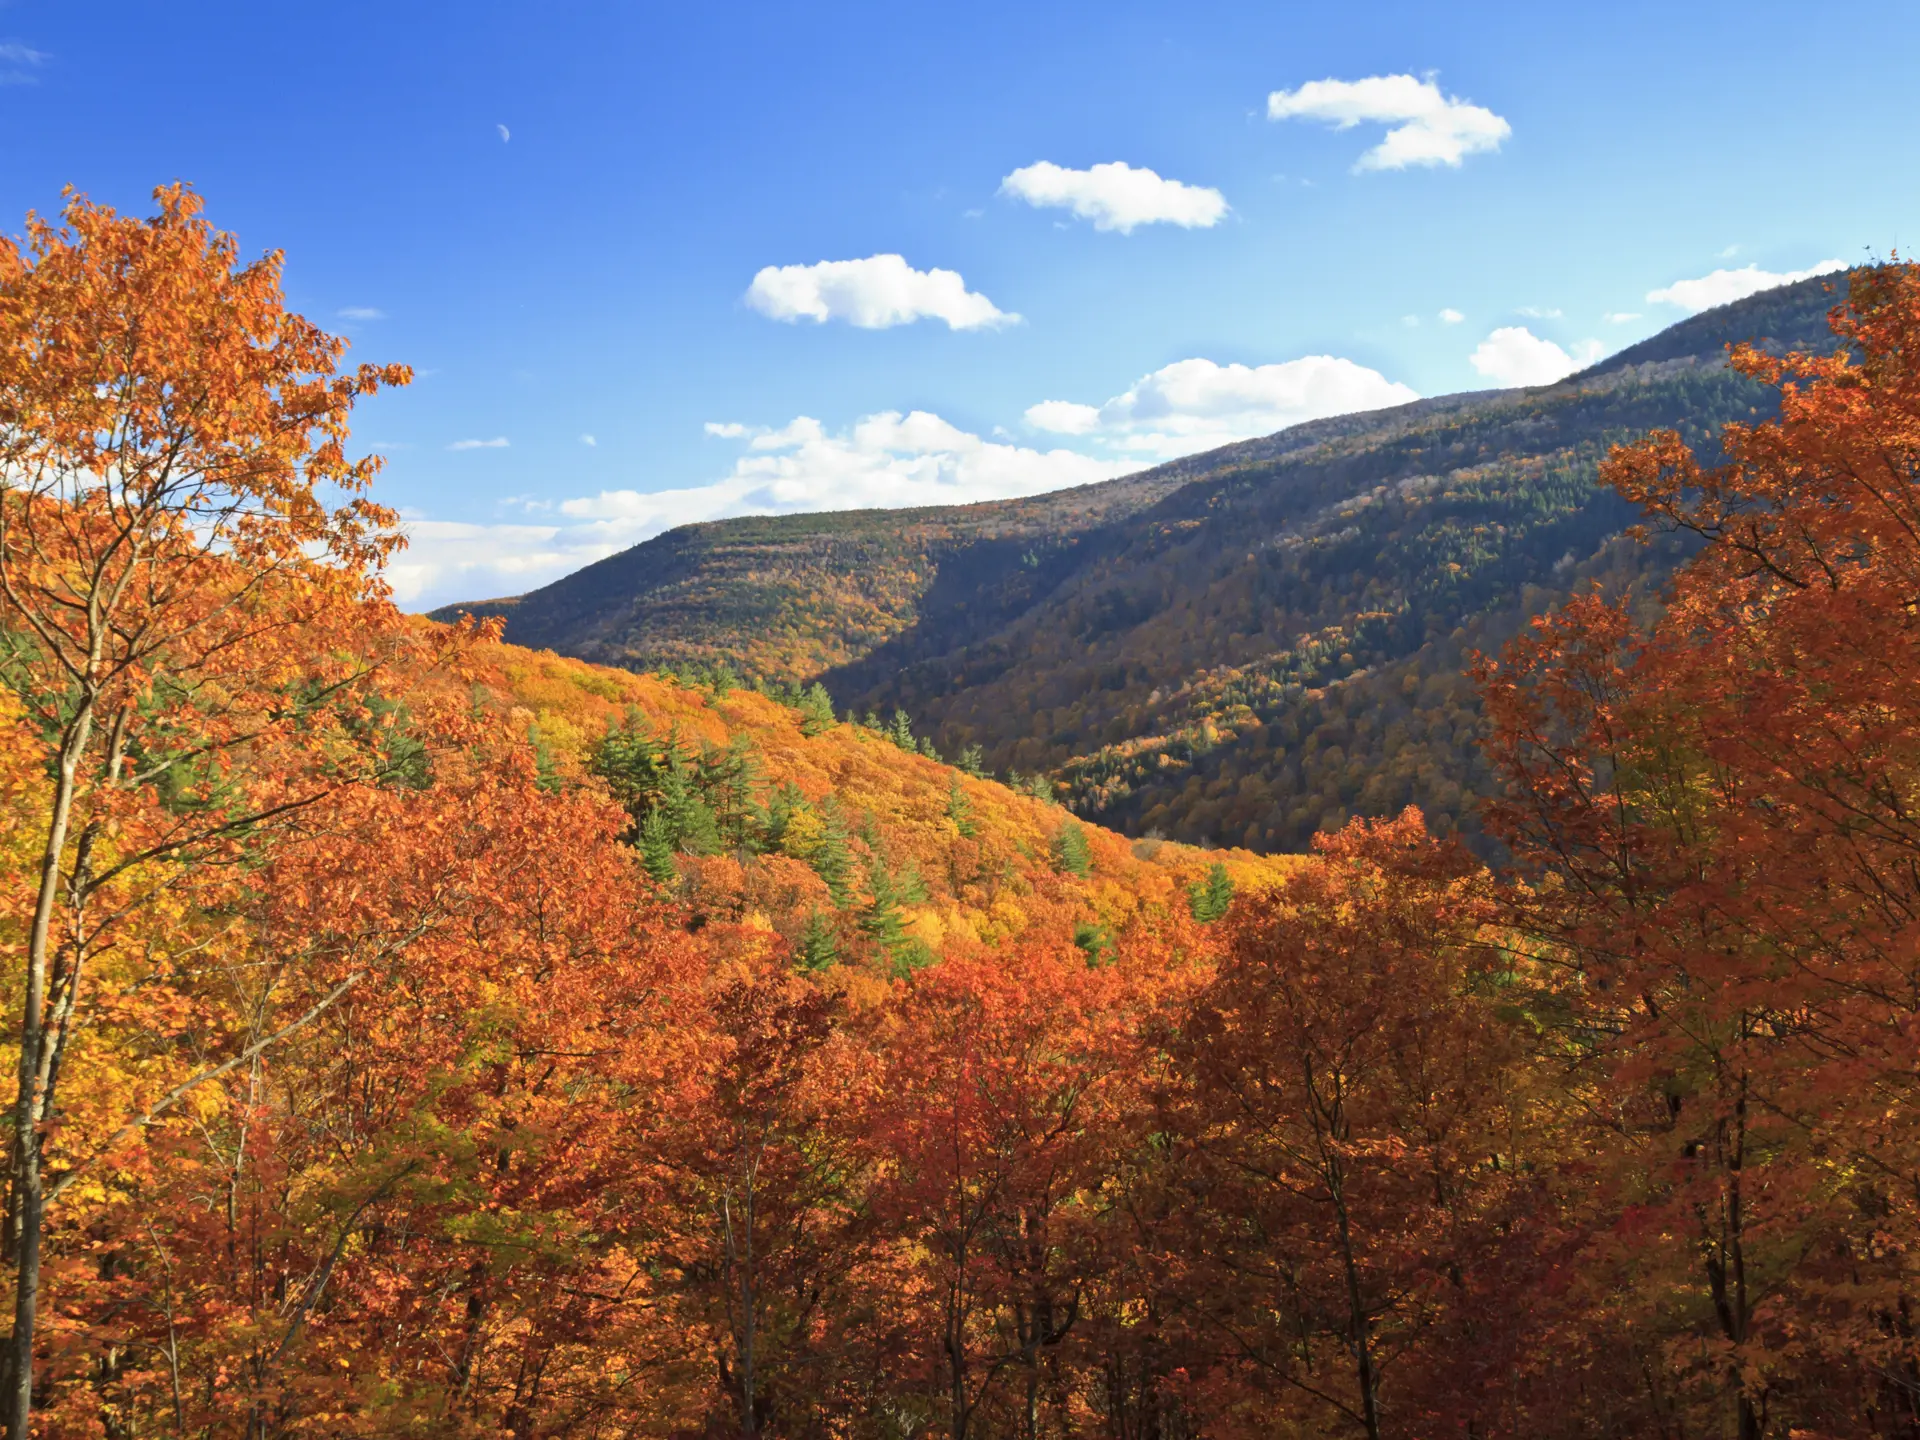 dag 6.shutterstock_116889145 Colorful autumn foliage in Kaaterskill Clove in the Catskills Mountains of New York.jpg